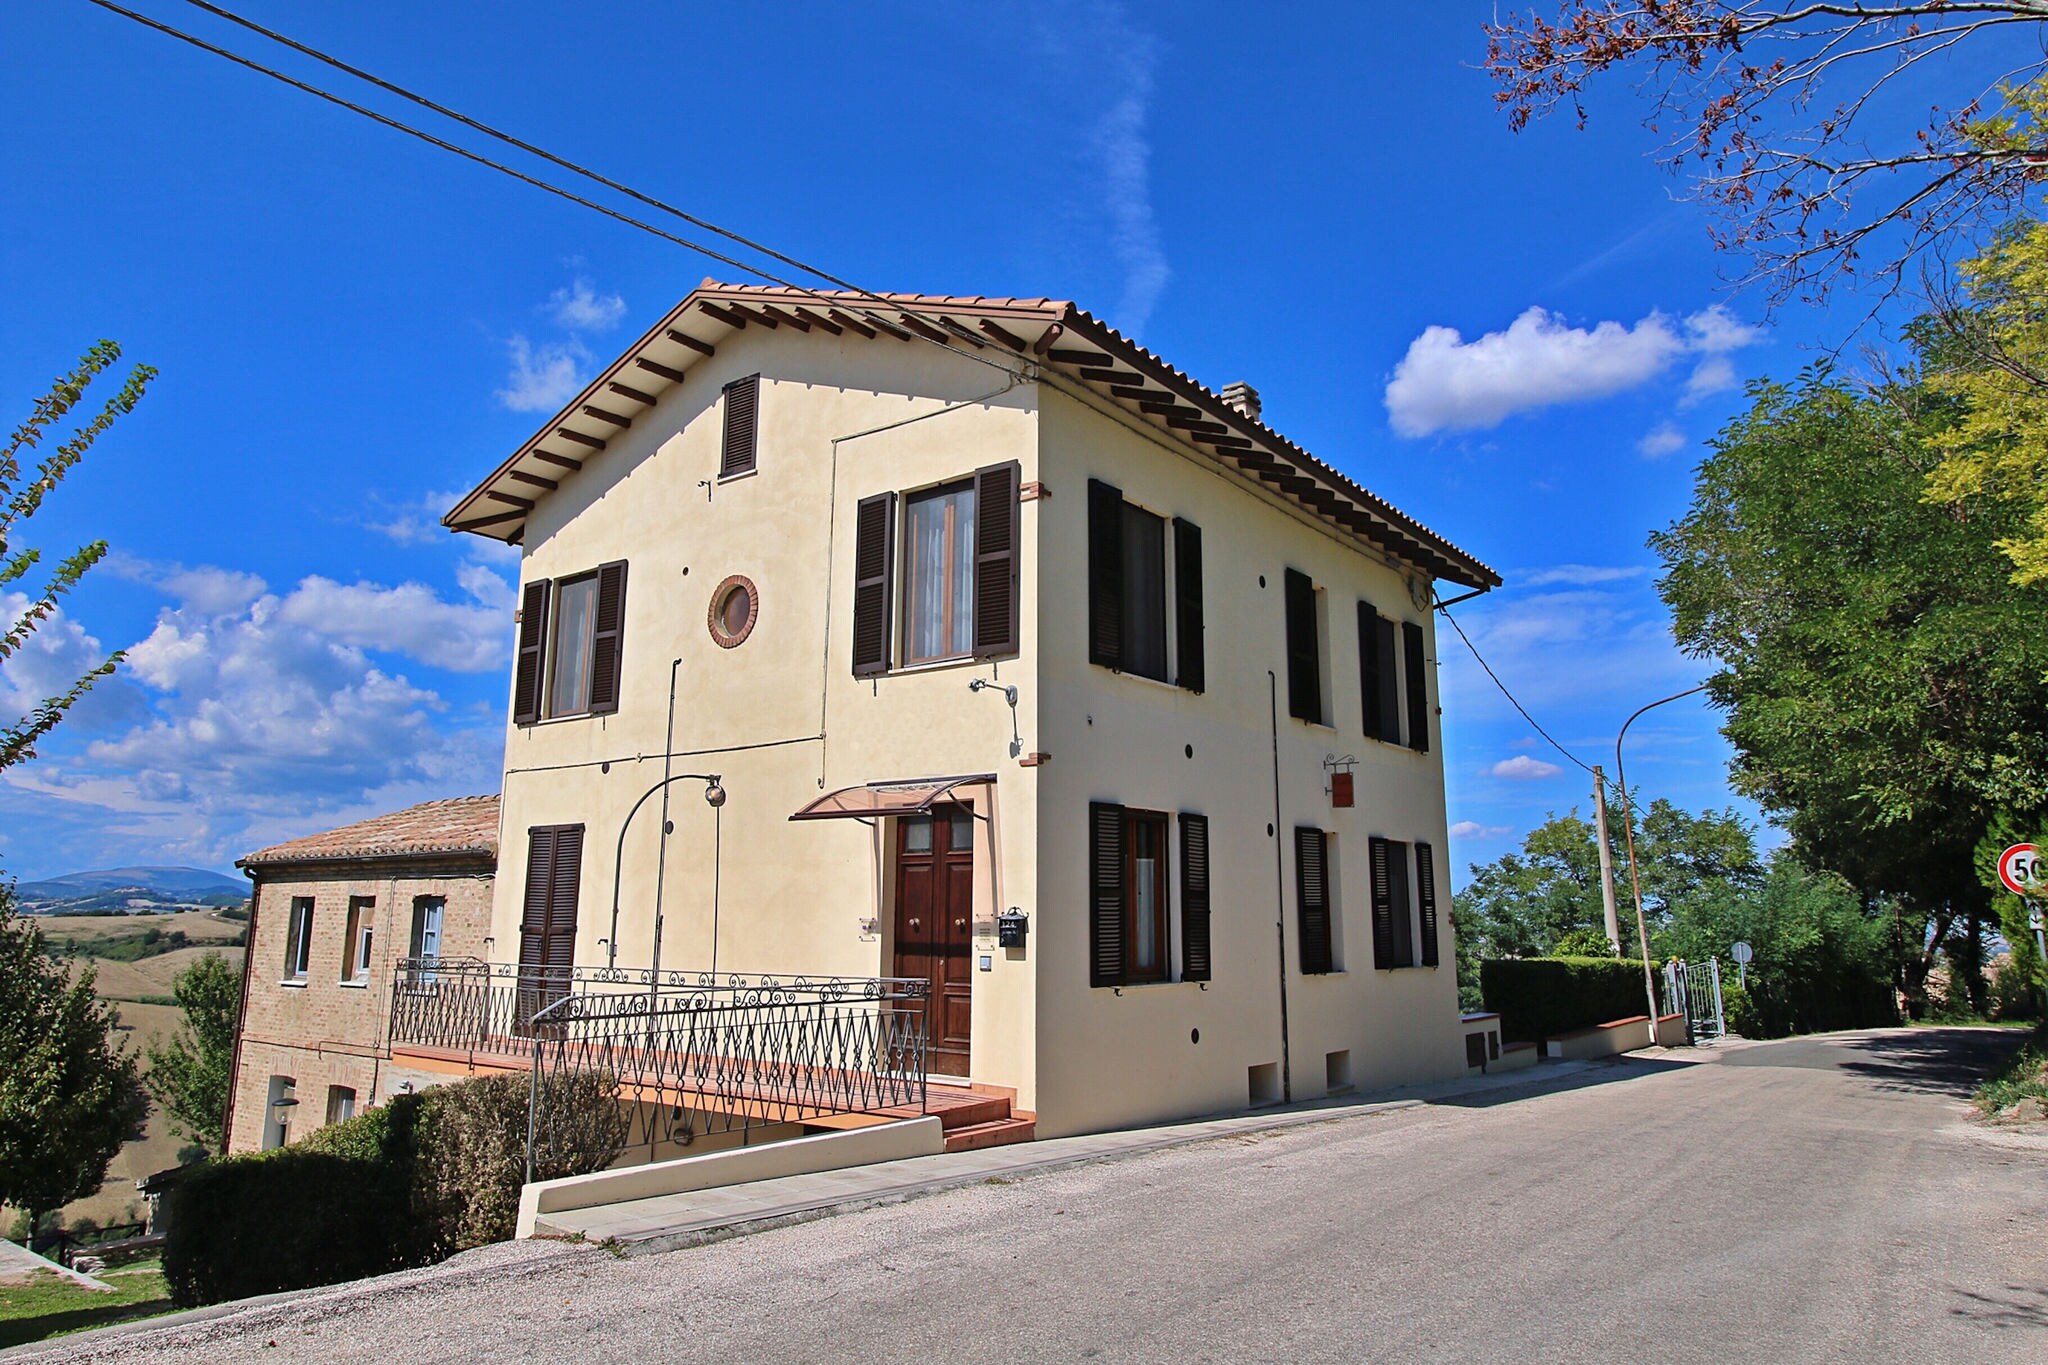 Villa in Piticchio with Swimming Pool, Garden, BBQ, Parking